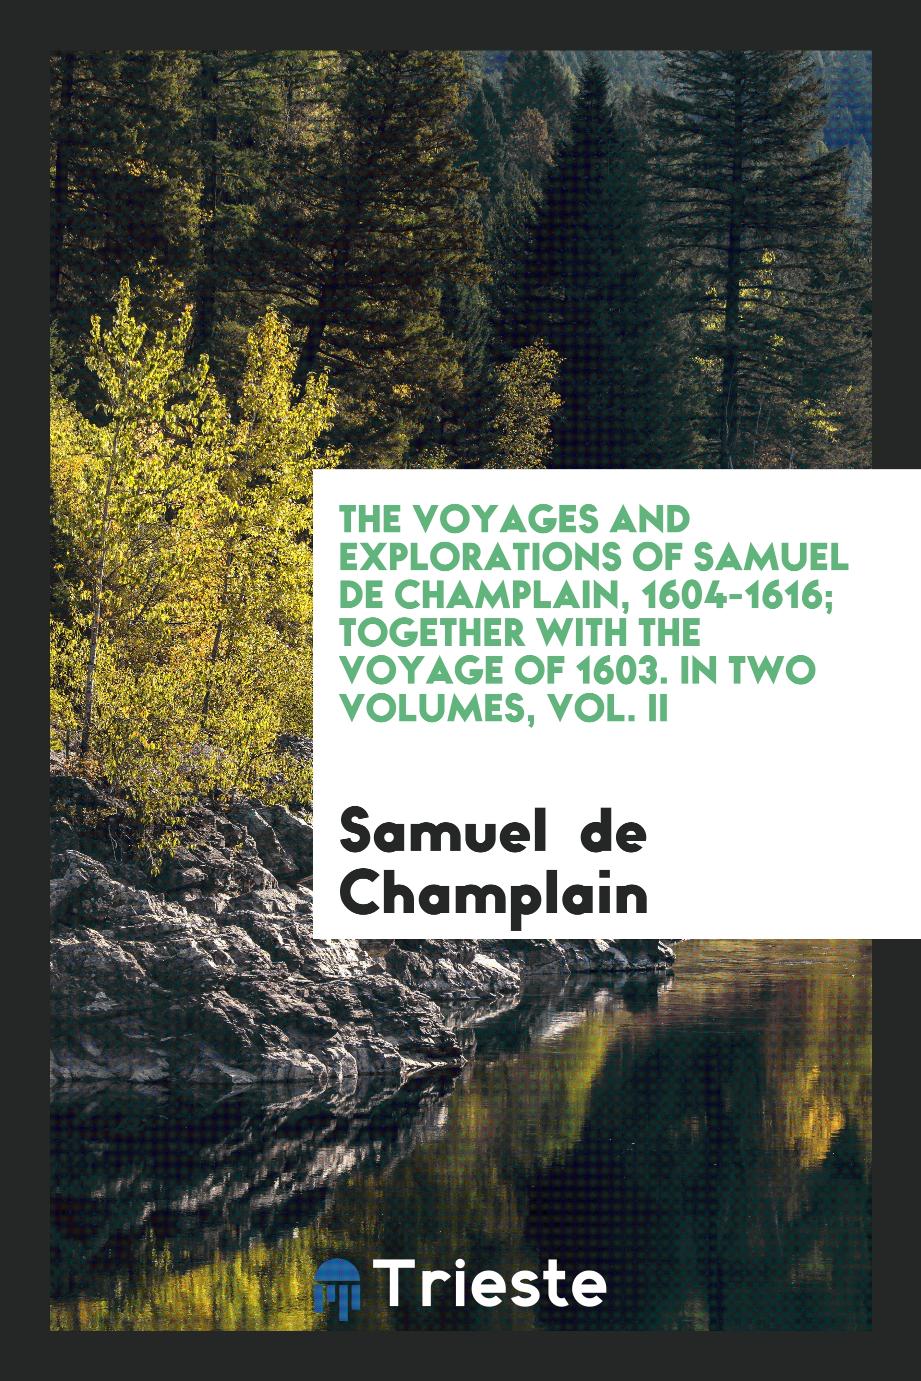 The Voyages and Explorations of Samuel De Champlain, 1604-1616; Together with the Voyage of 1603. In Two Volumes, Vol. II